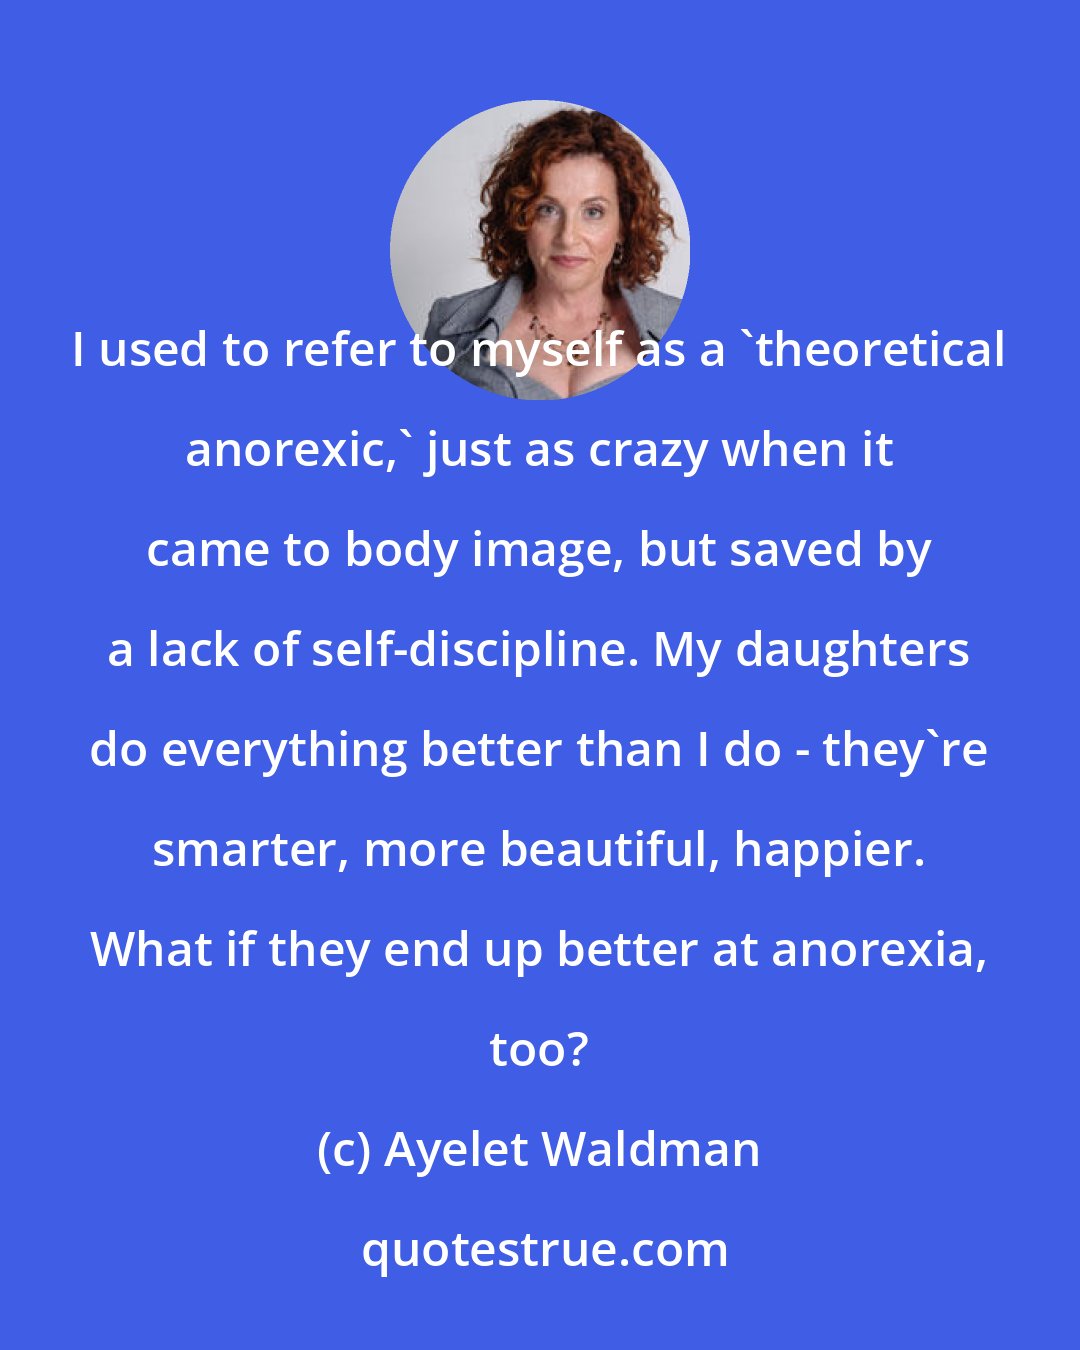 Ayelet Waldman: I used to refer to myself as a 'theoretical anorexic,' just as crazy when it came to body image, but saved by a lack of self-discipline. My daughters do everything better than I do - they're smarter, more beautiful, happier. What if they end up better at anorexia, too?